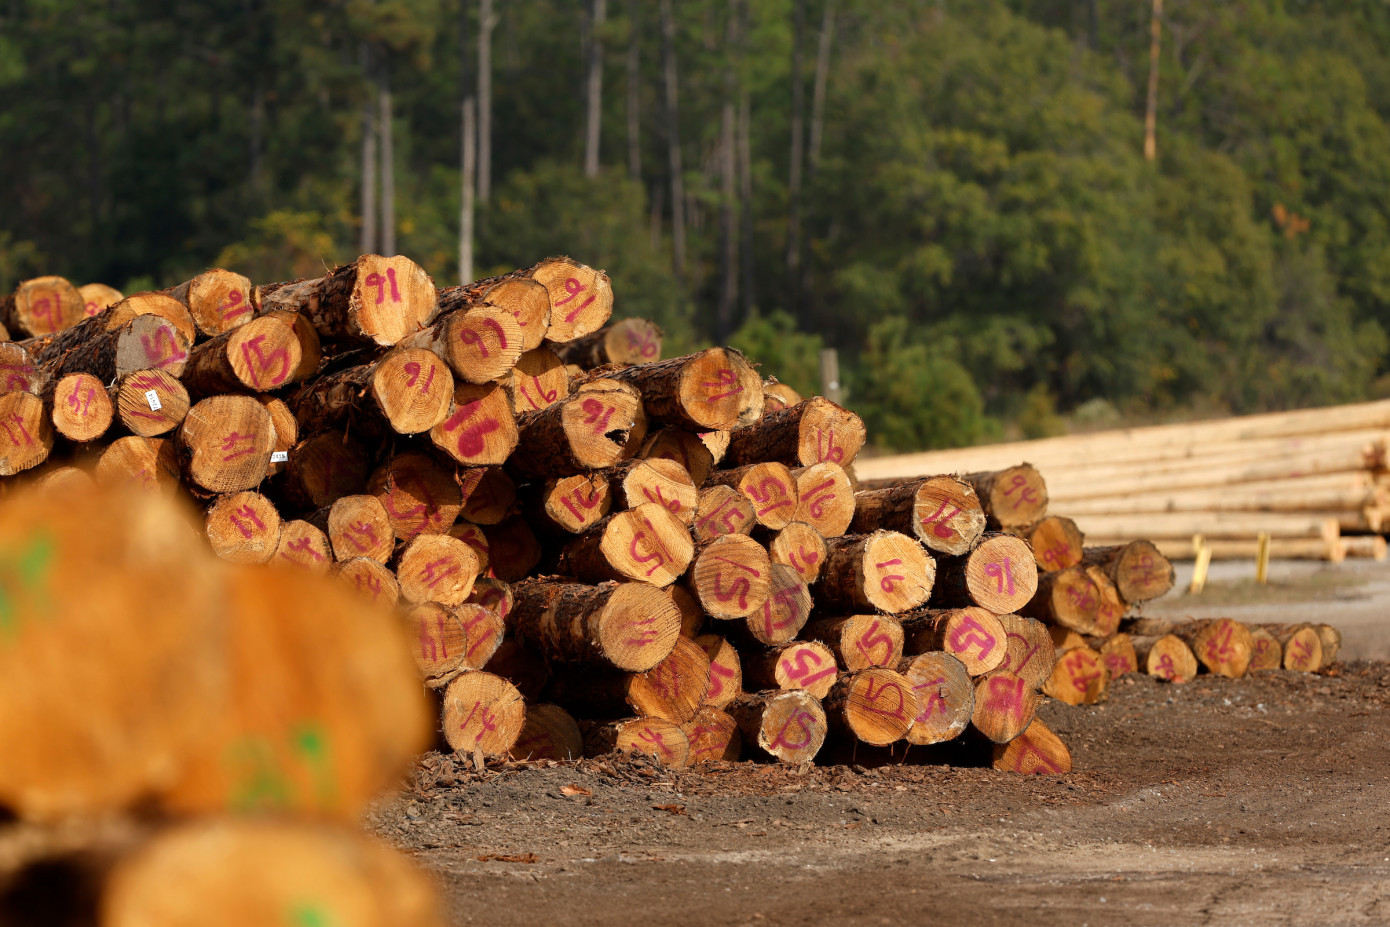 Koppers acquires Brown Wood Preserving for $100 million